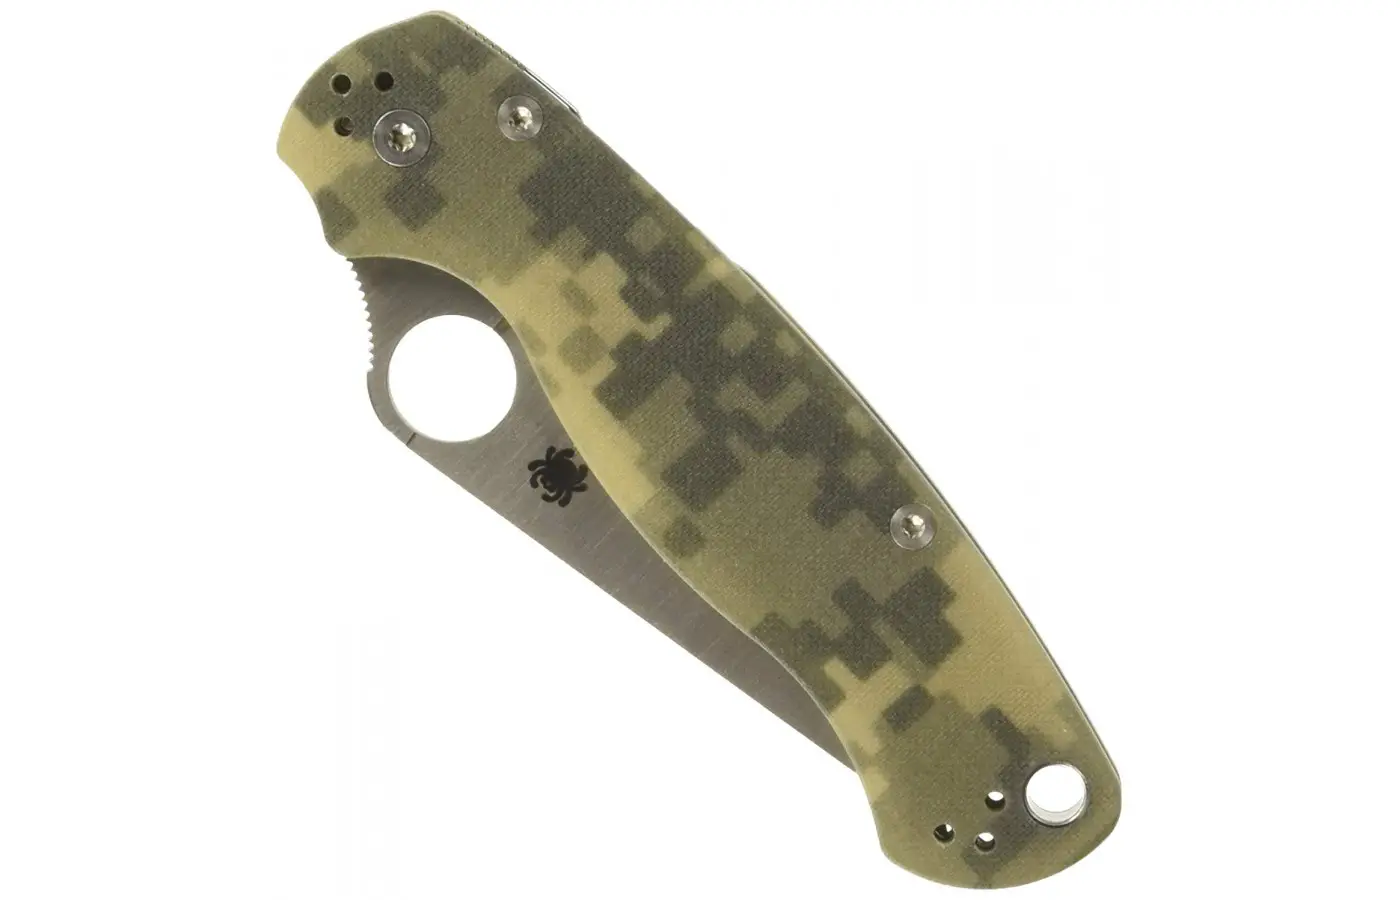 The larger than normal Spydie hole permits opening with gloves.